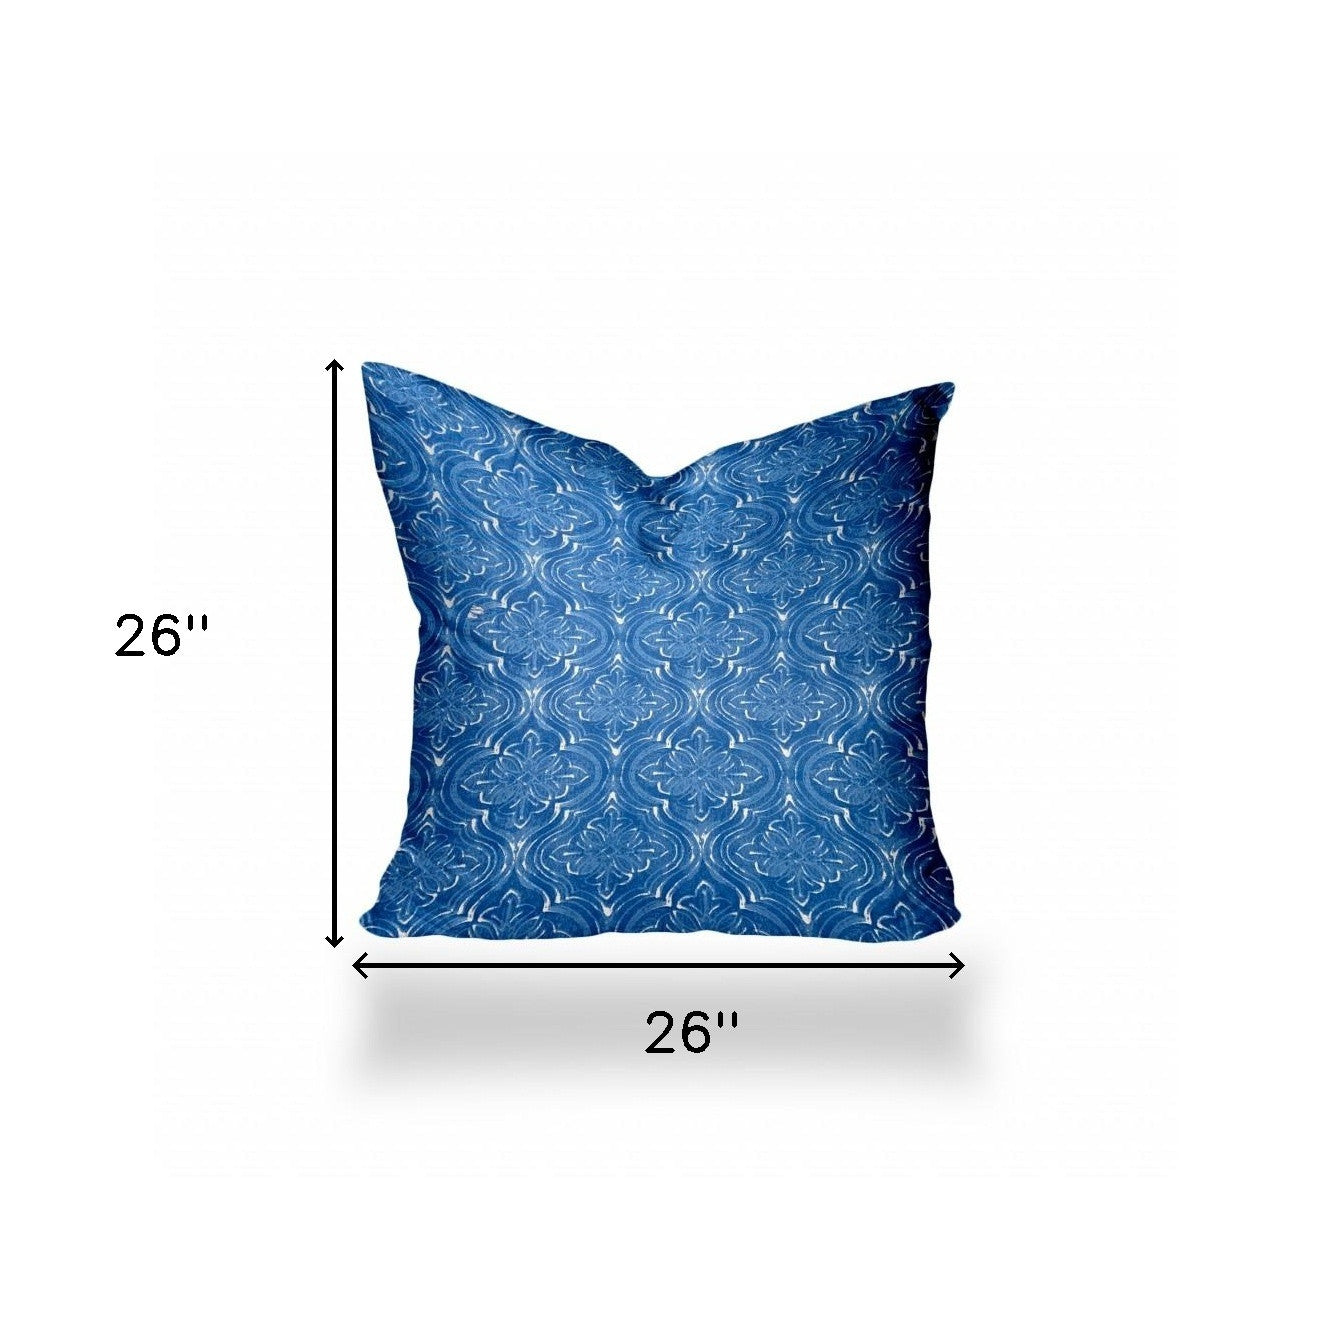 26" X 26" Blue And White Blown Seam Ikat Throw Indoor Outdoor Pillow